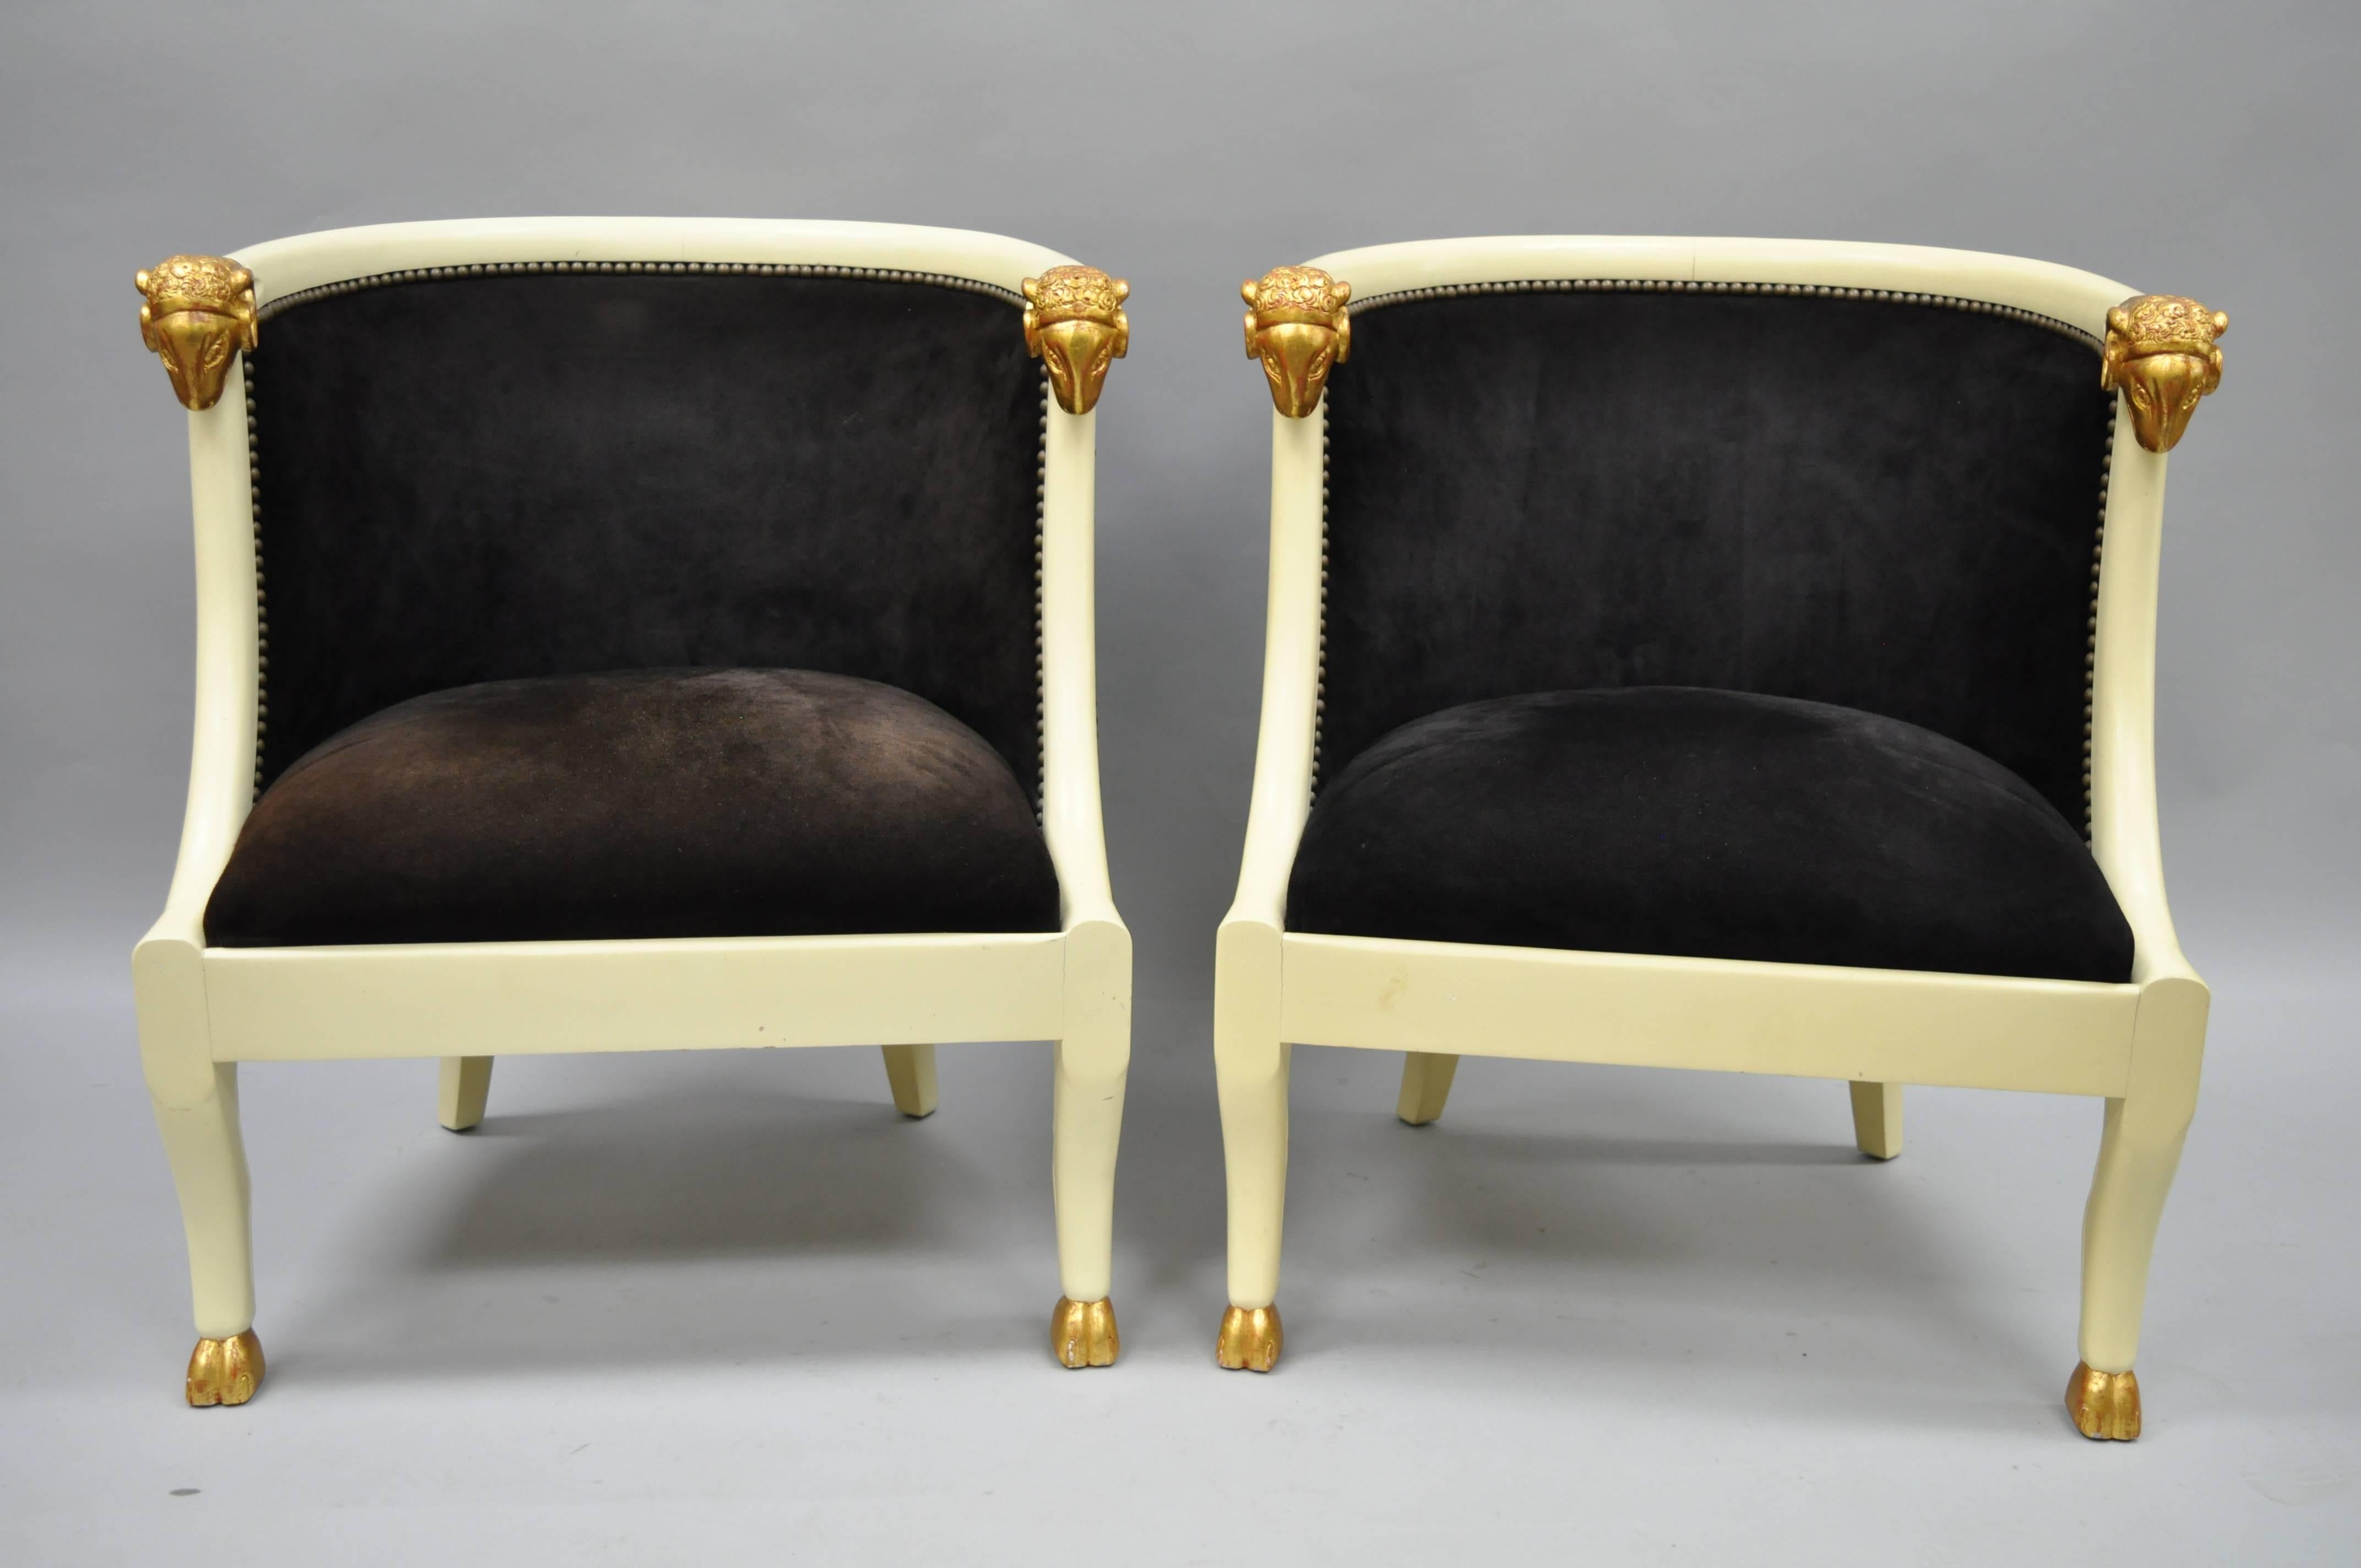 Impressive pair of ram's head Regency / neoclassical style barrel back chairs. Item features heavy solid carved wood frames, ram's head armrests, hoof feet, shapely barrel backs and blackish brown suede upholstery with nailhead trim. Chairs are